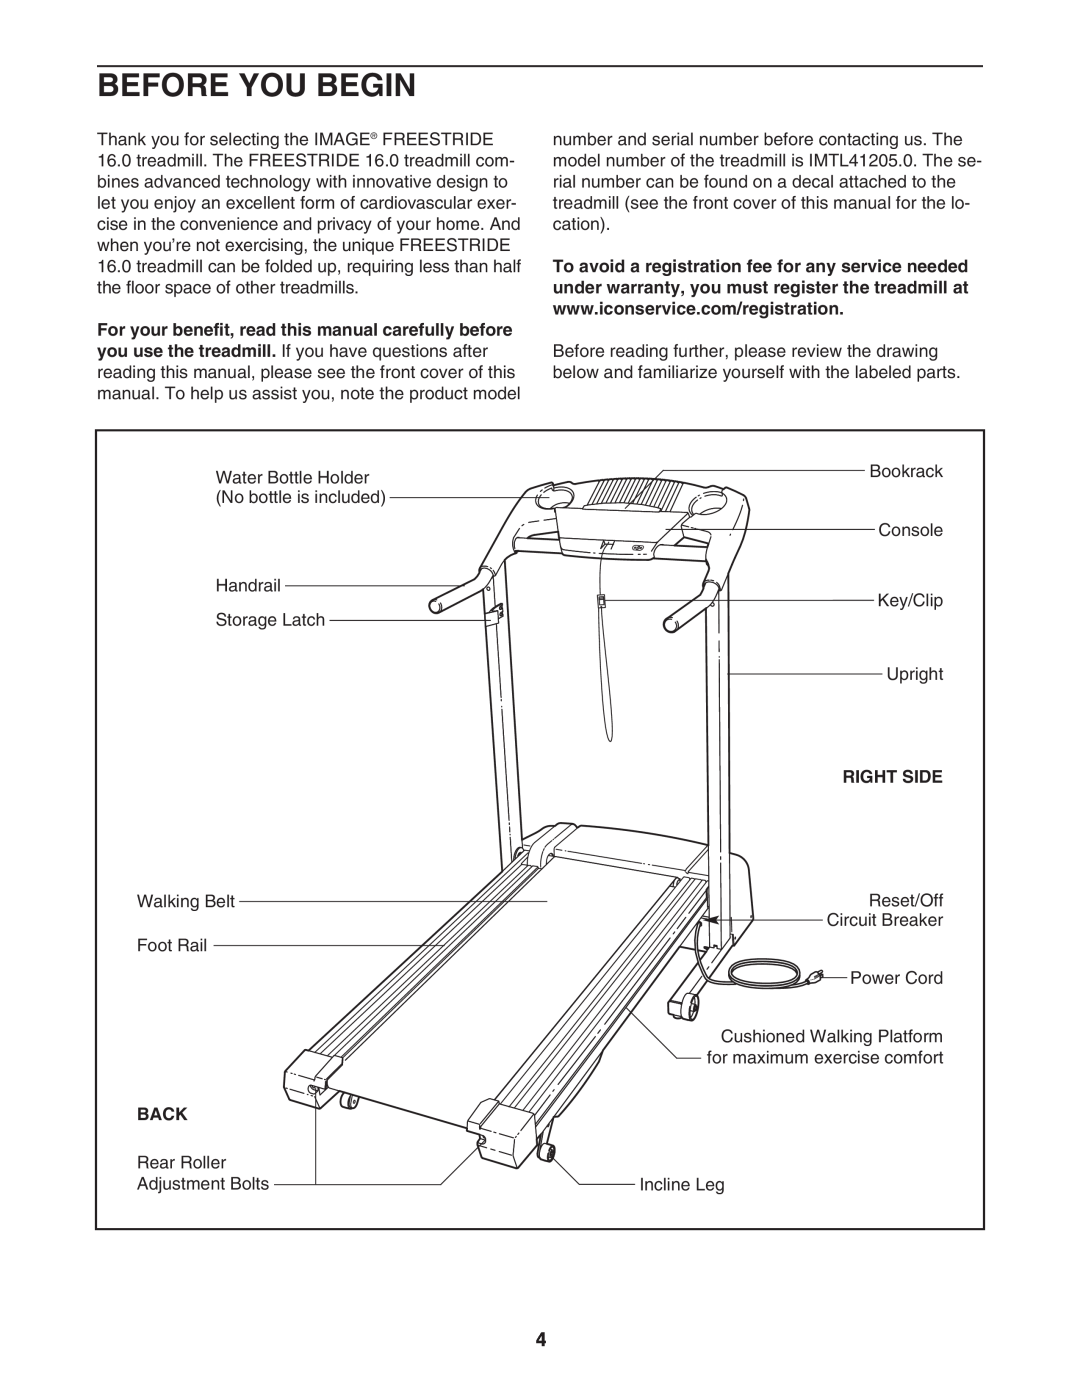 Image IMTL41205.0 user manual Before You Begin, Right Side, Back 